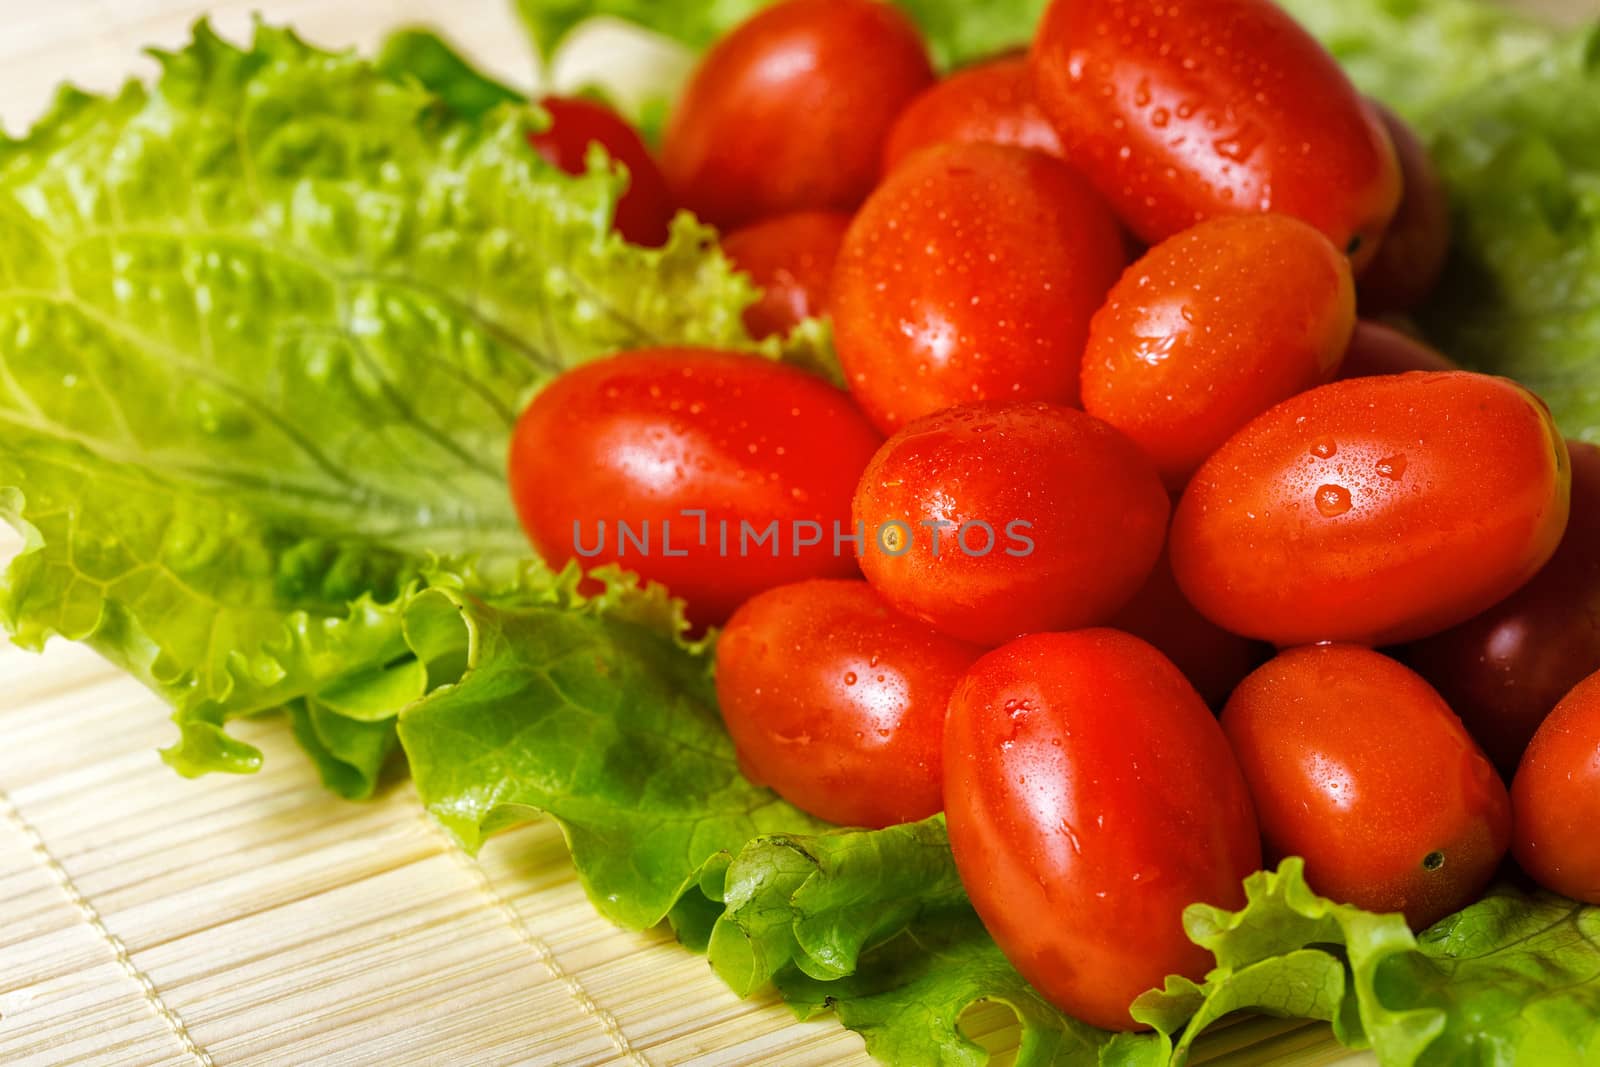 Tomatoes and lettuce by Vagengeym